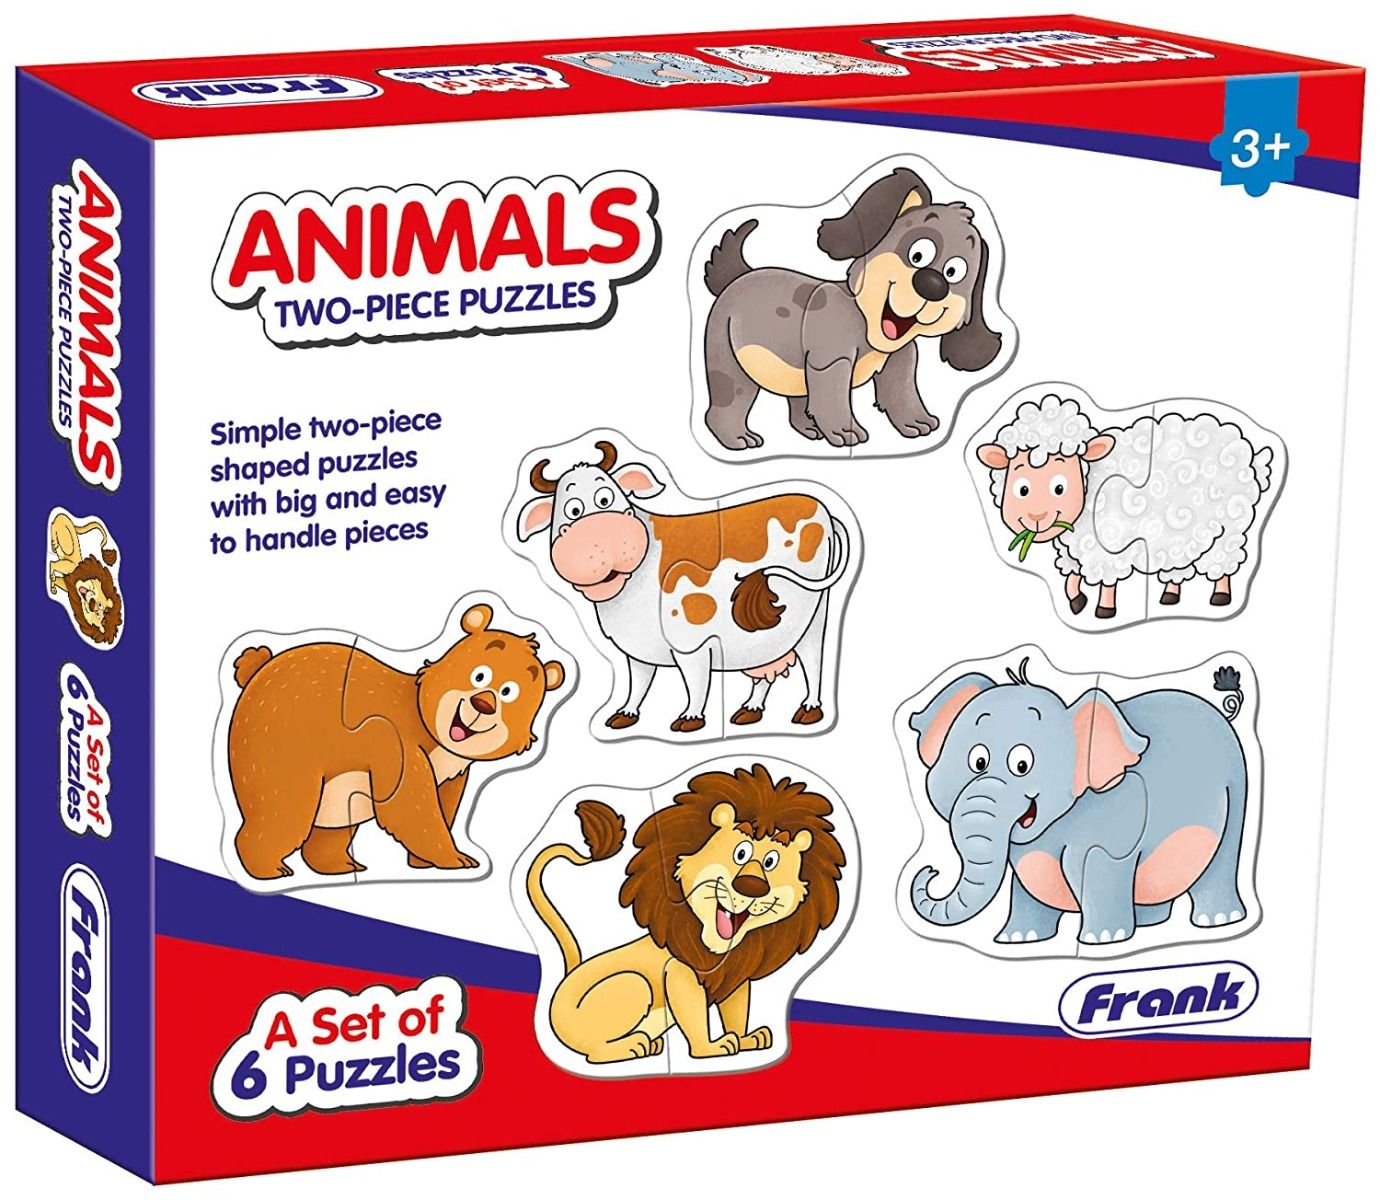 Frank Animals Puzzles - A Set of 6 Two-Piece Shaped Jigsaw Puzzles (12 Pcs)